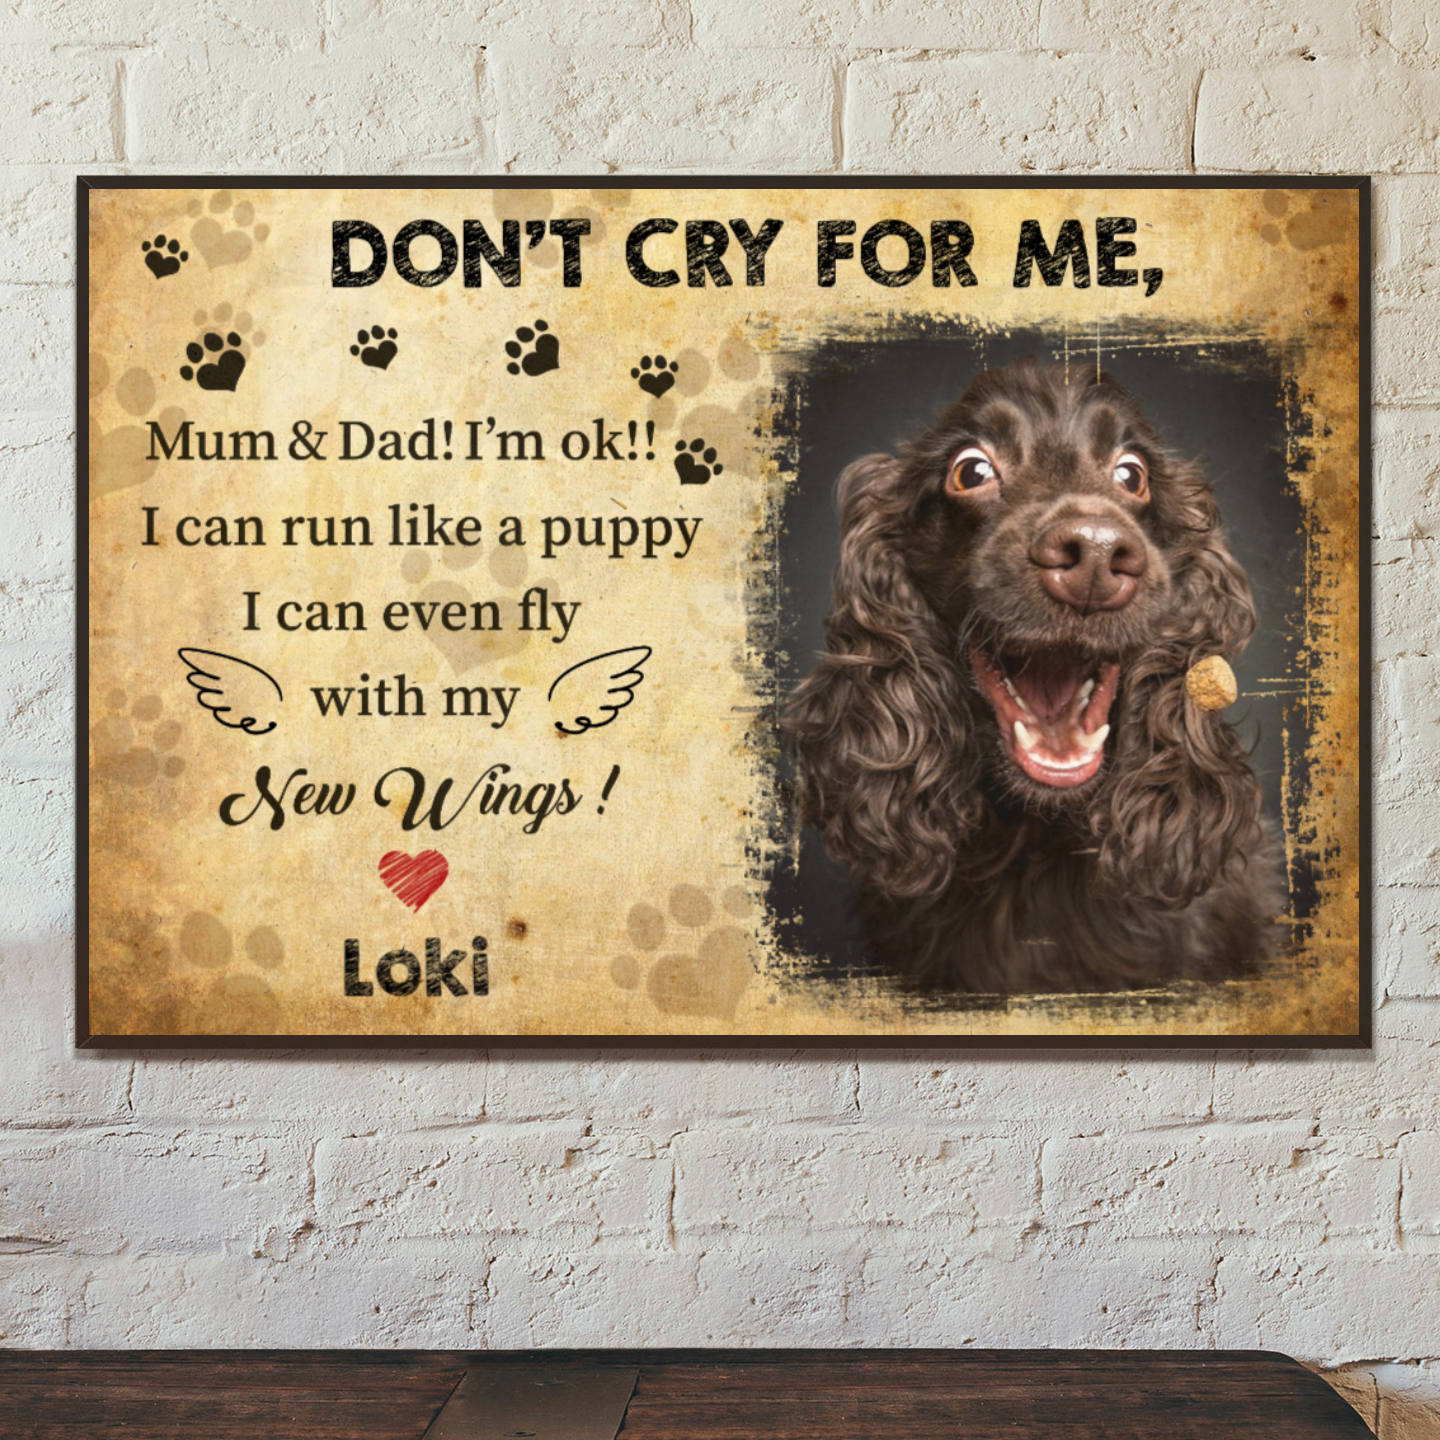 Ciaocustom Poster/Framed Canvas/Unframed Canvas, Custom Dog Image/Name/Background/Text, Gifts For Dog Lovers, Don't cry for me, Mum & Dad I'm ok!